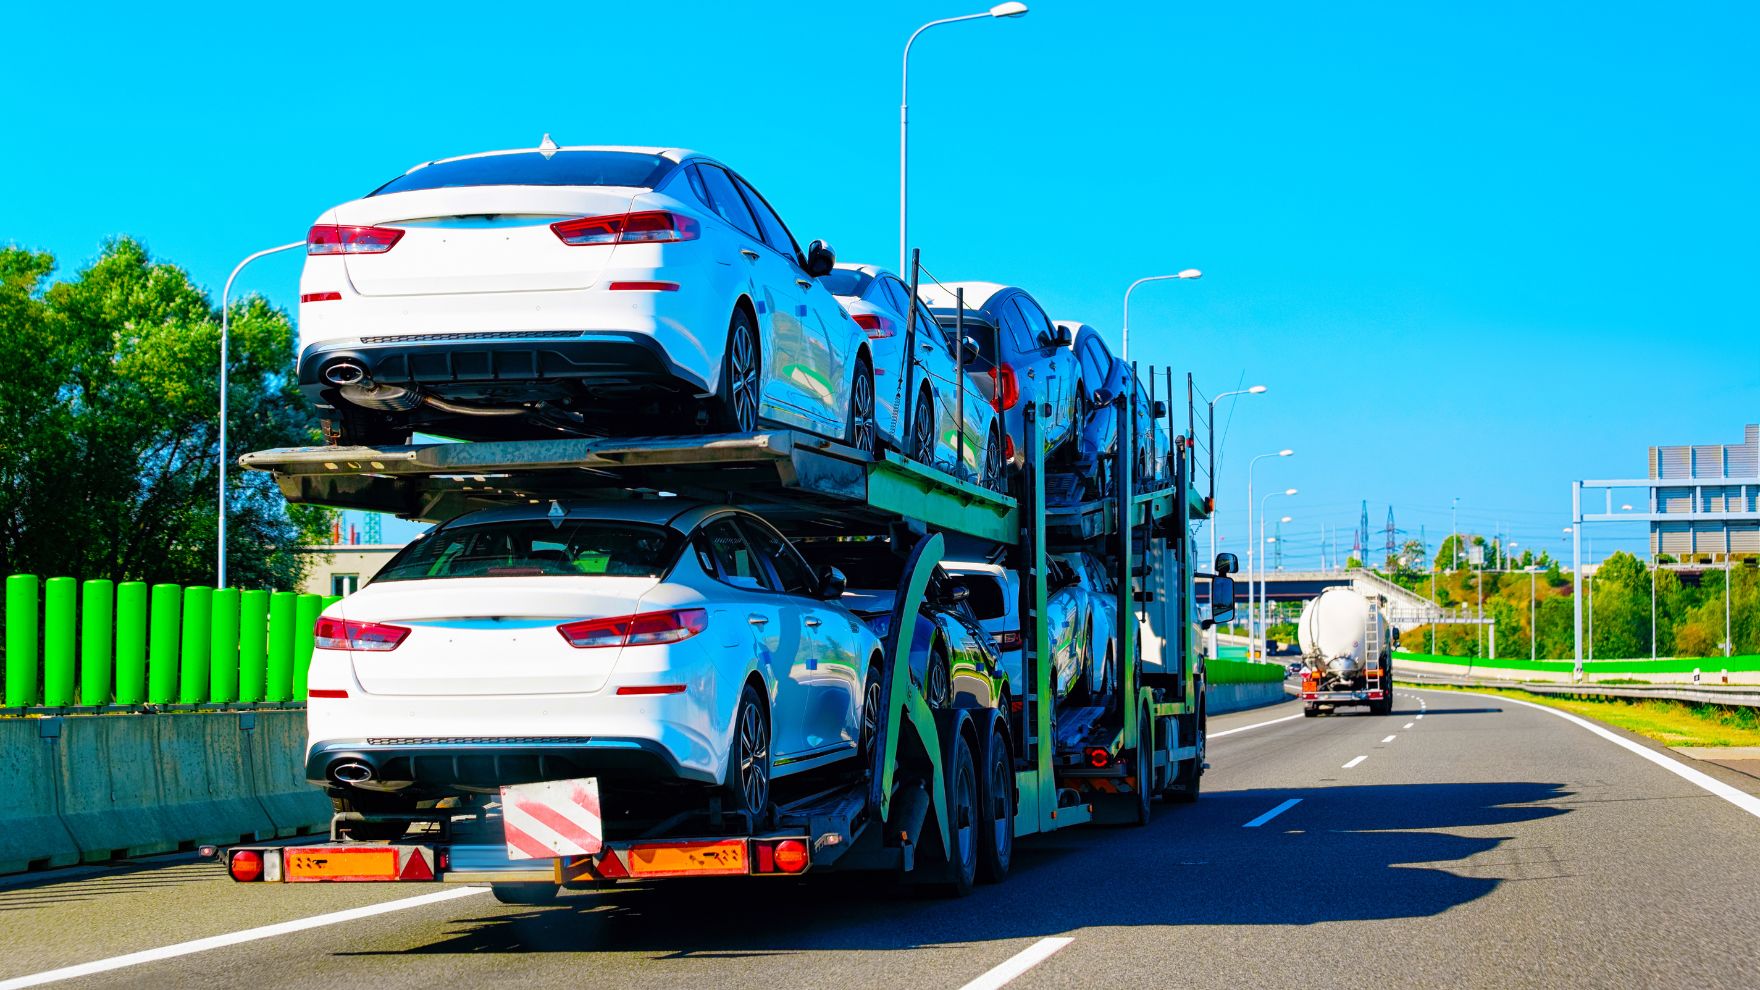 How to Ship Your Car for a Temporary Job Assignment: A Guide for Professionals